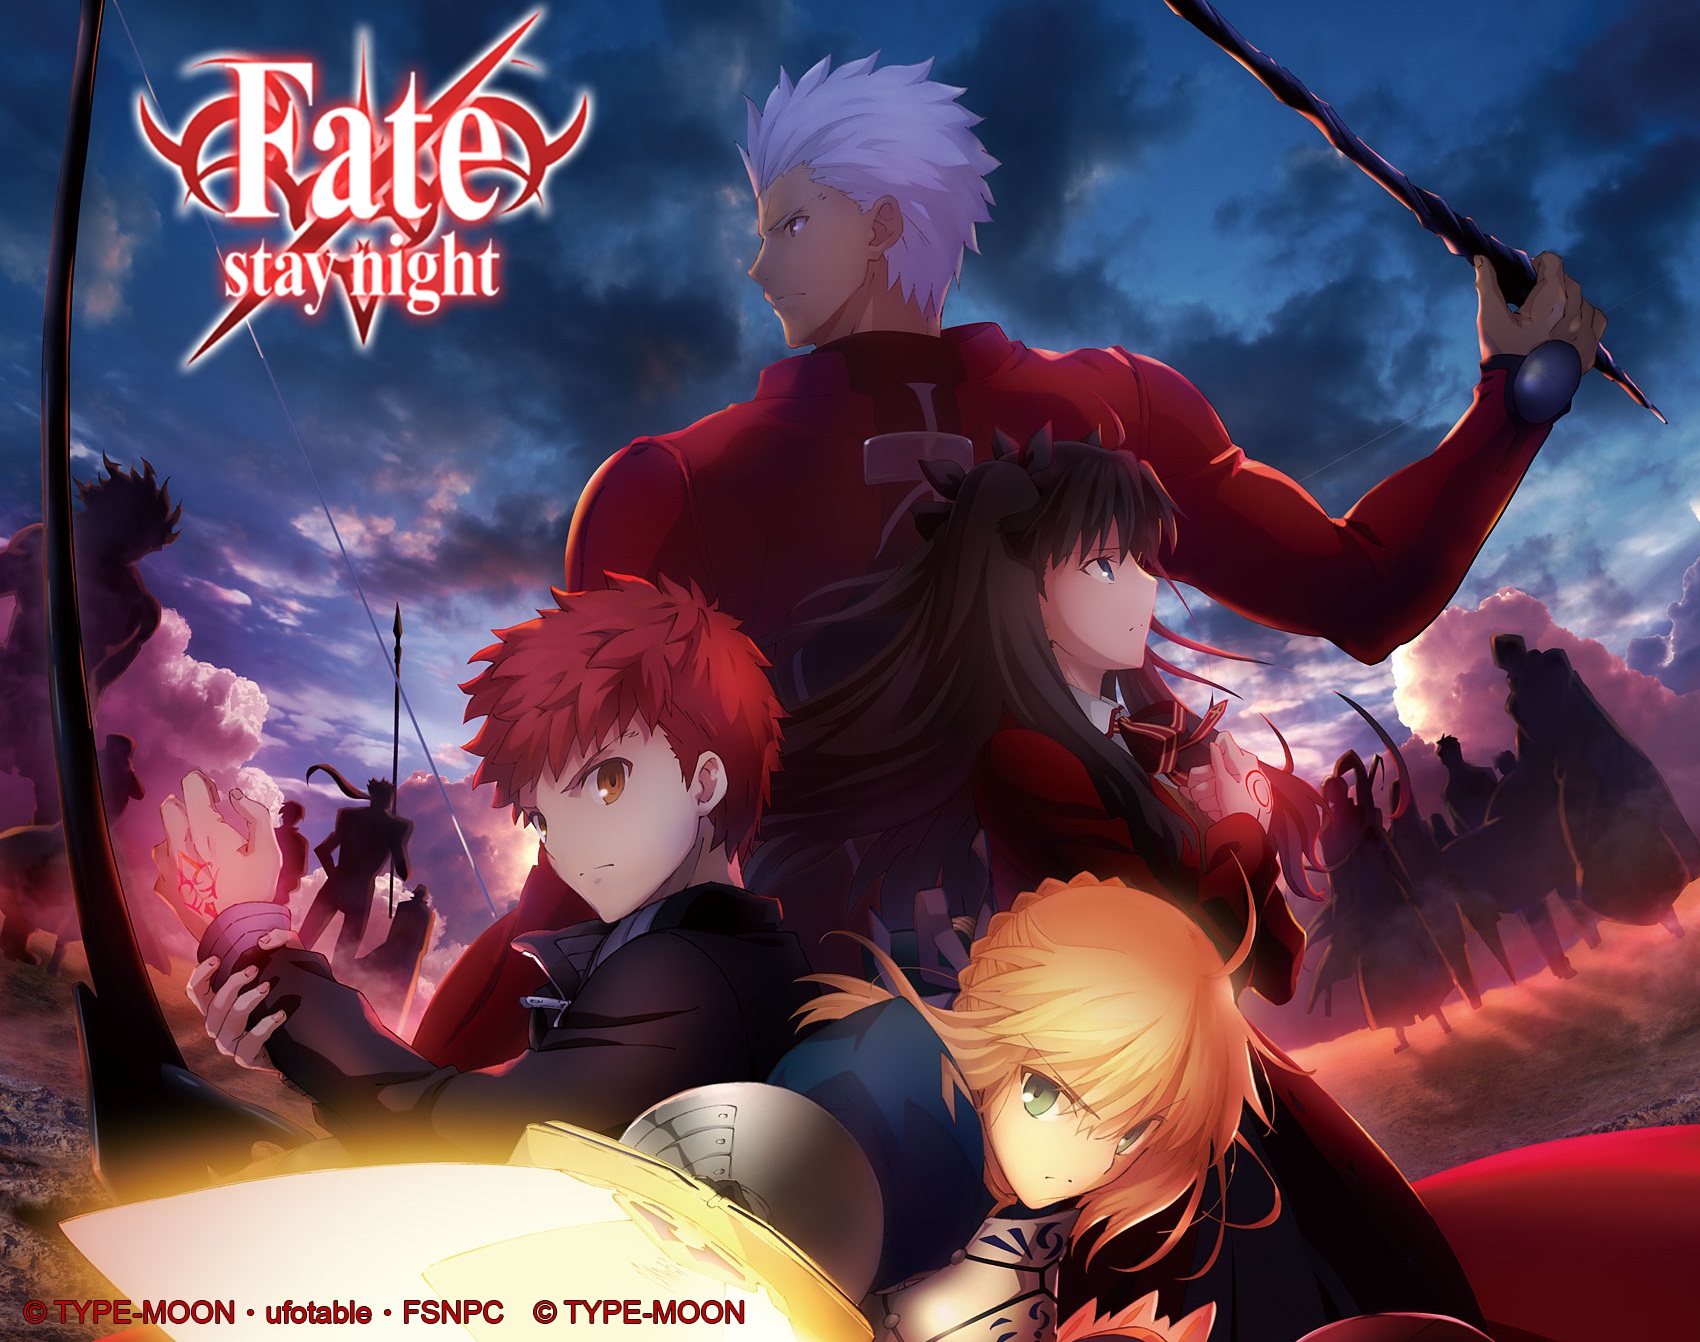 Theatrical Edition Fate/stay night Heaven's Feel - Anime Visual Guide |  TYPE-MOON Wiki | Fandom